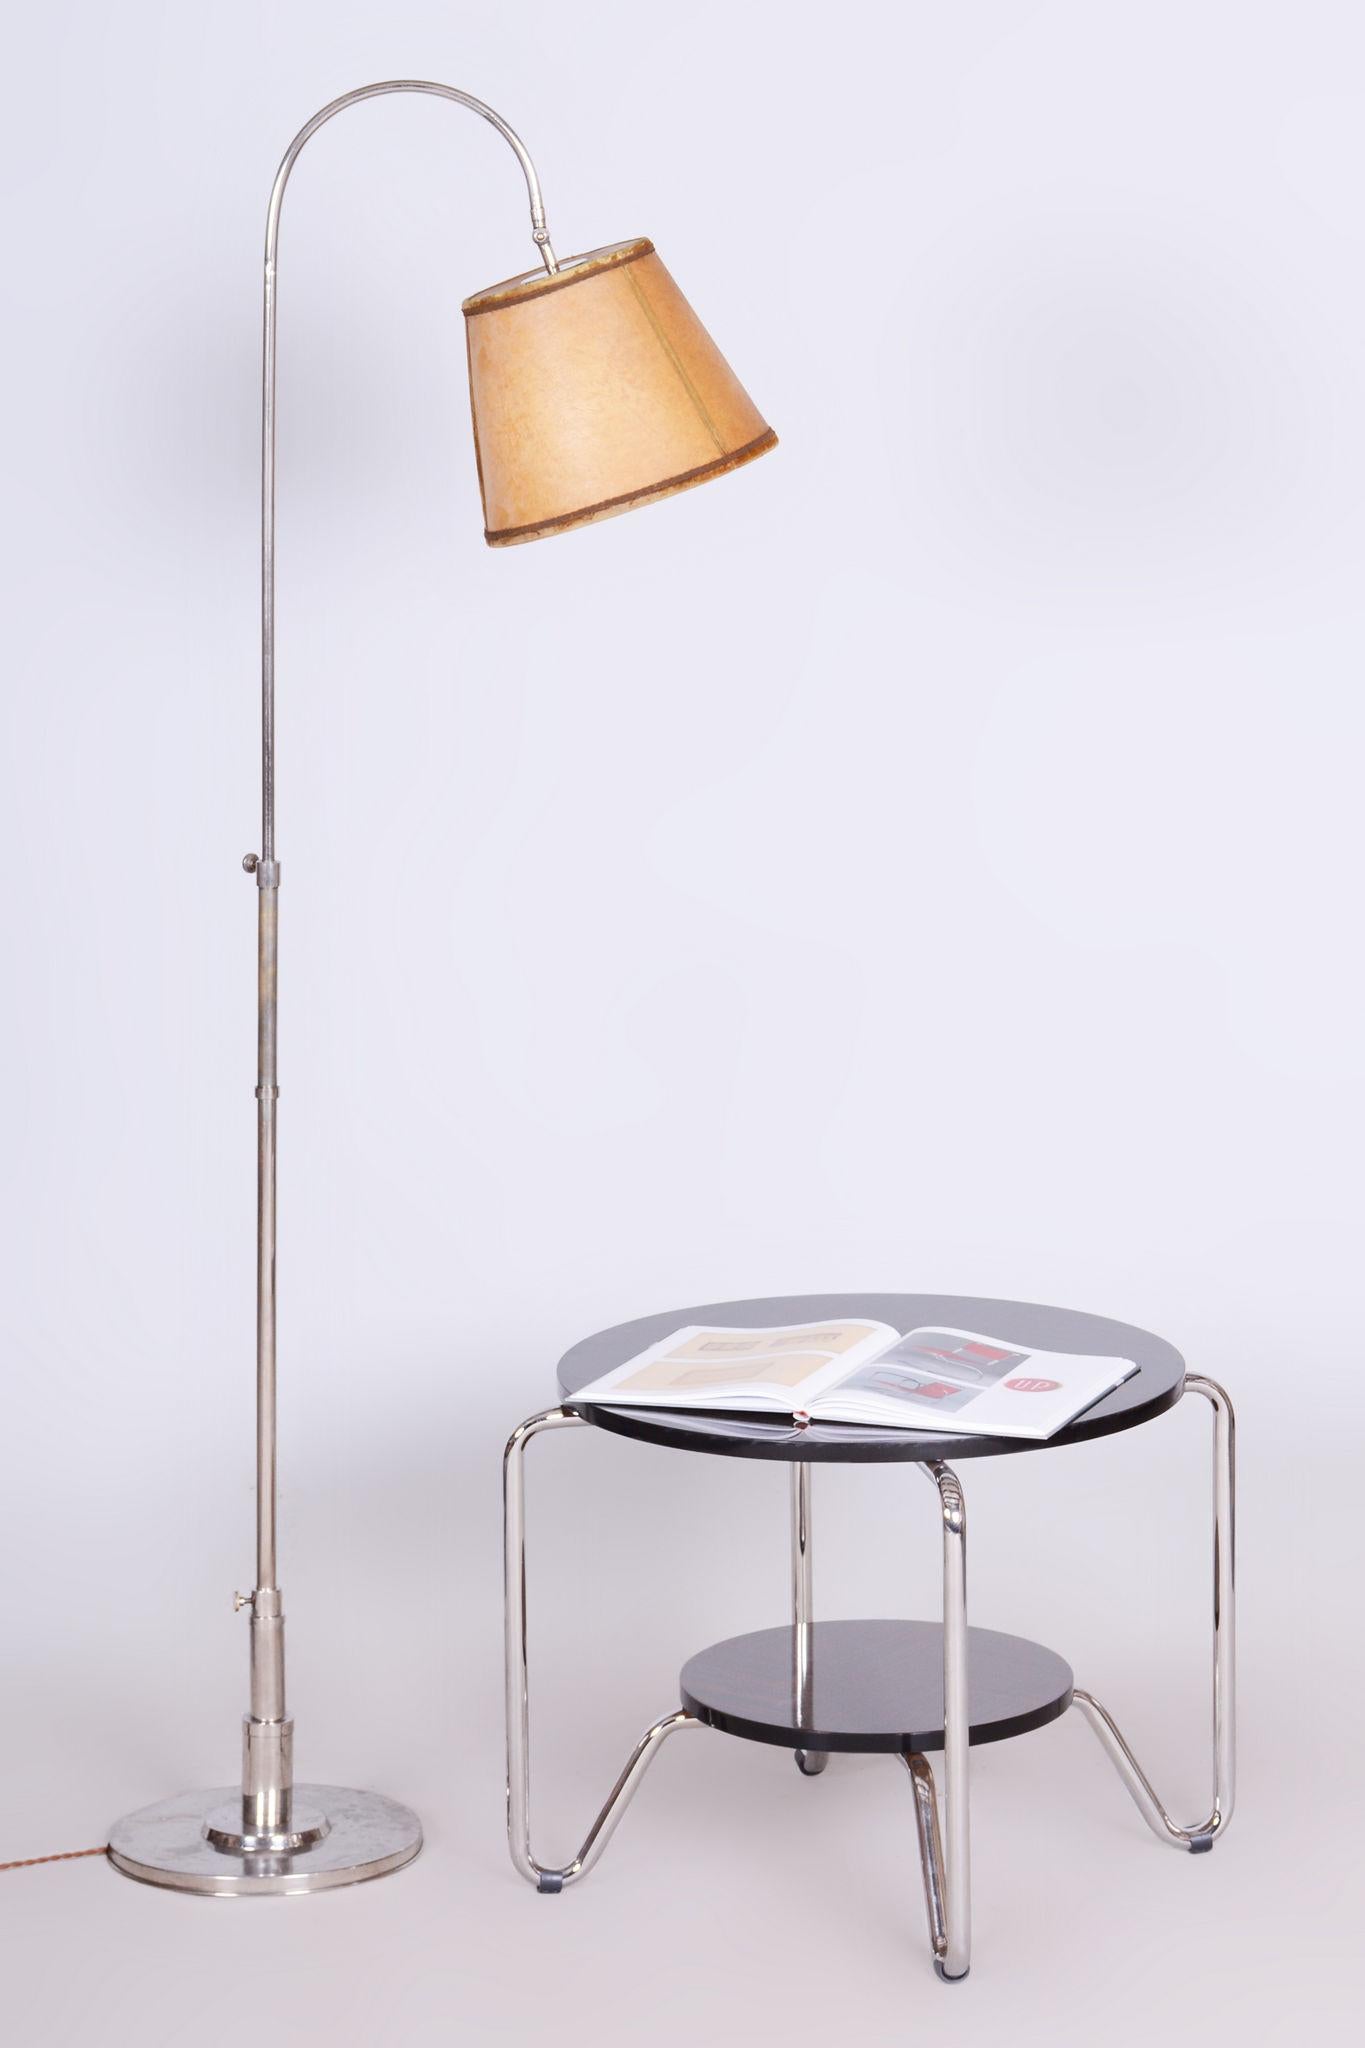 Restored Czech Bauhaus Floor Lamp, Nickel-Plated Steel, Parchment Shade, 1920s For Sale 2